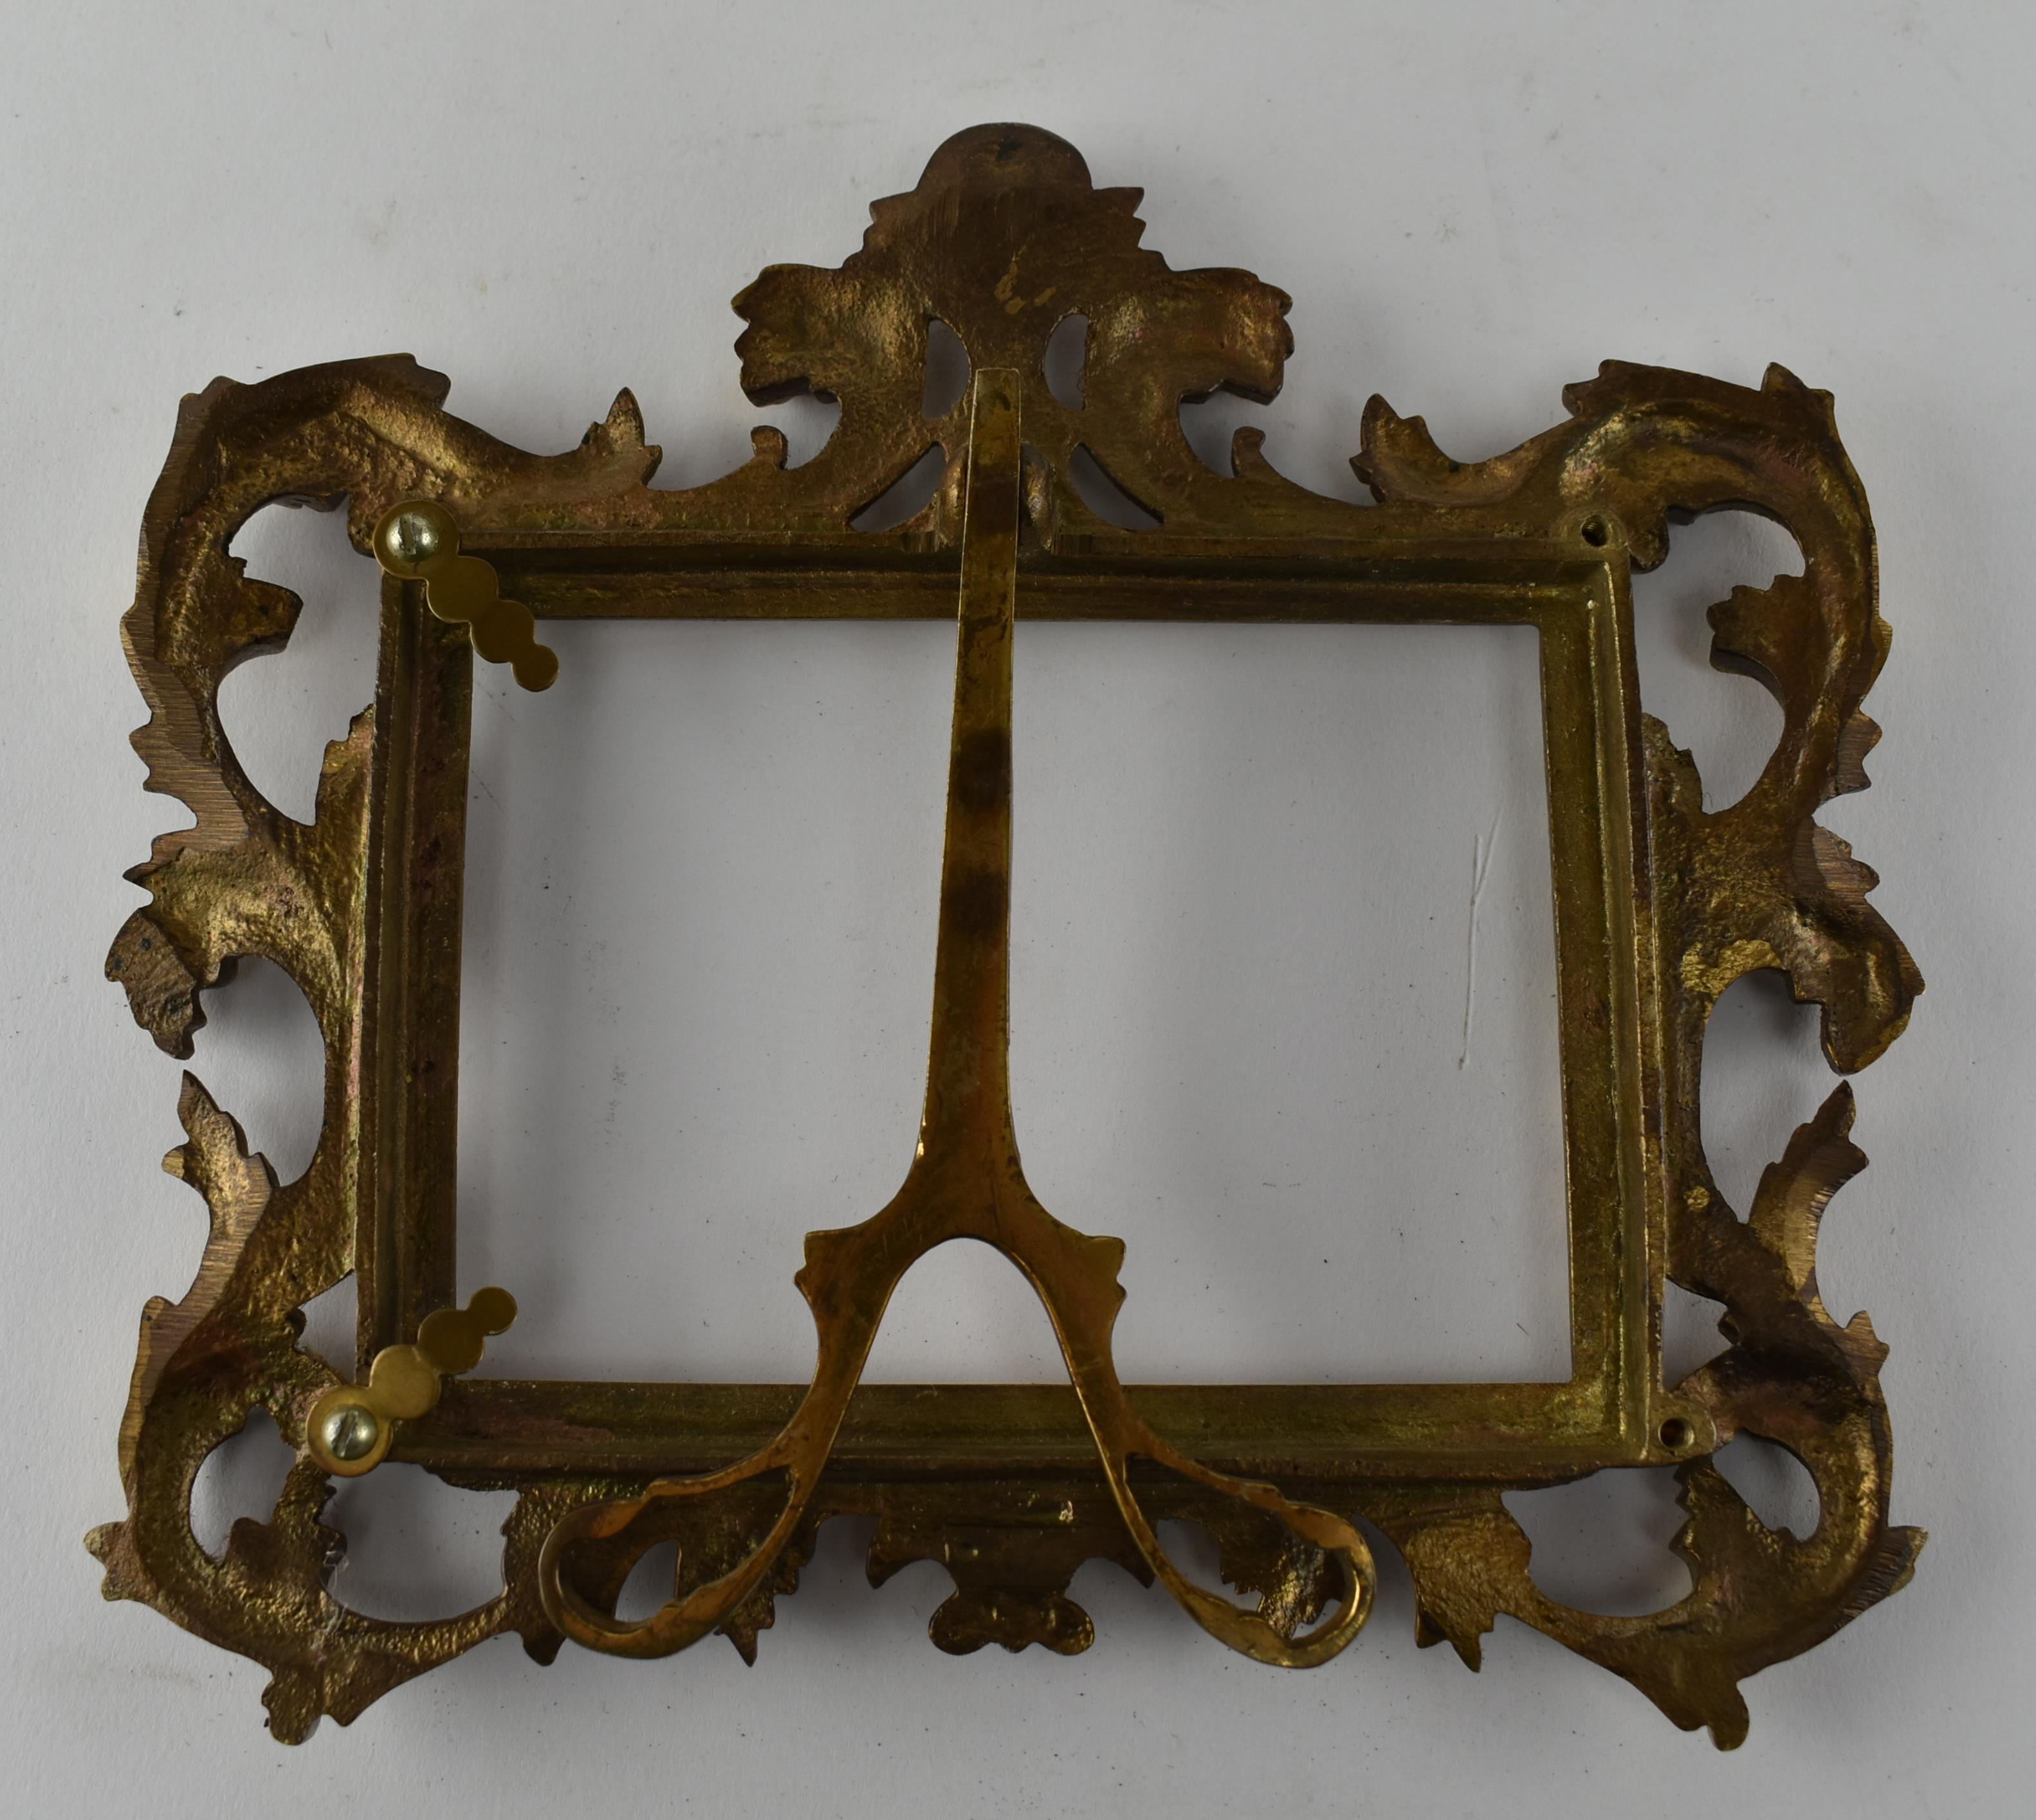 EARLY 20TH CENTURY CONTINENTAL BRASS PHOTOGRAPH FRAME - Image 3 of 5